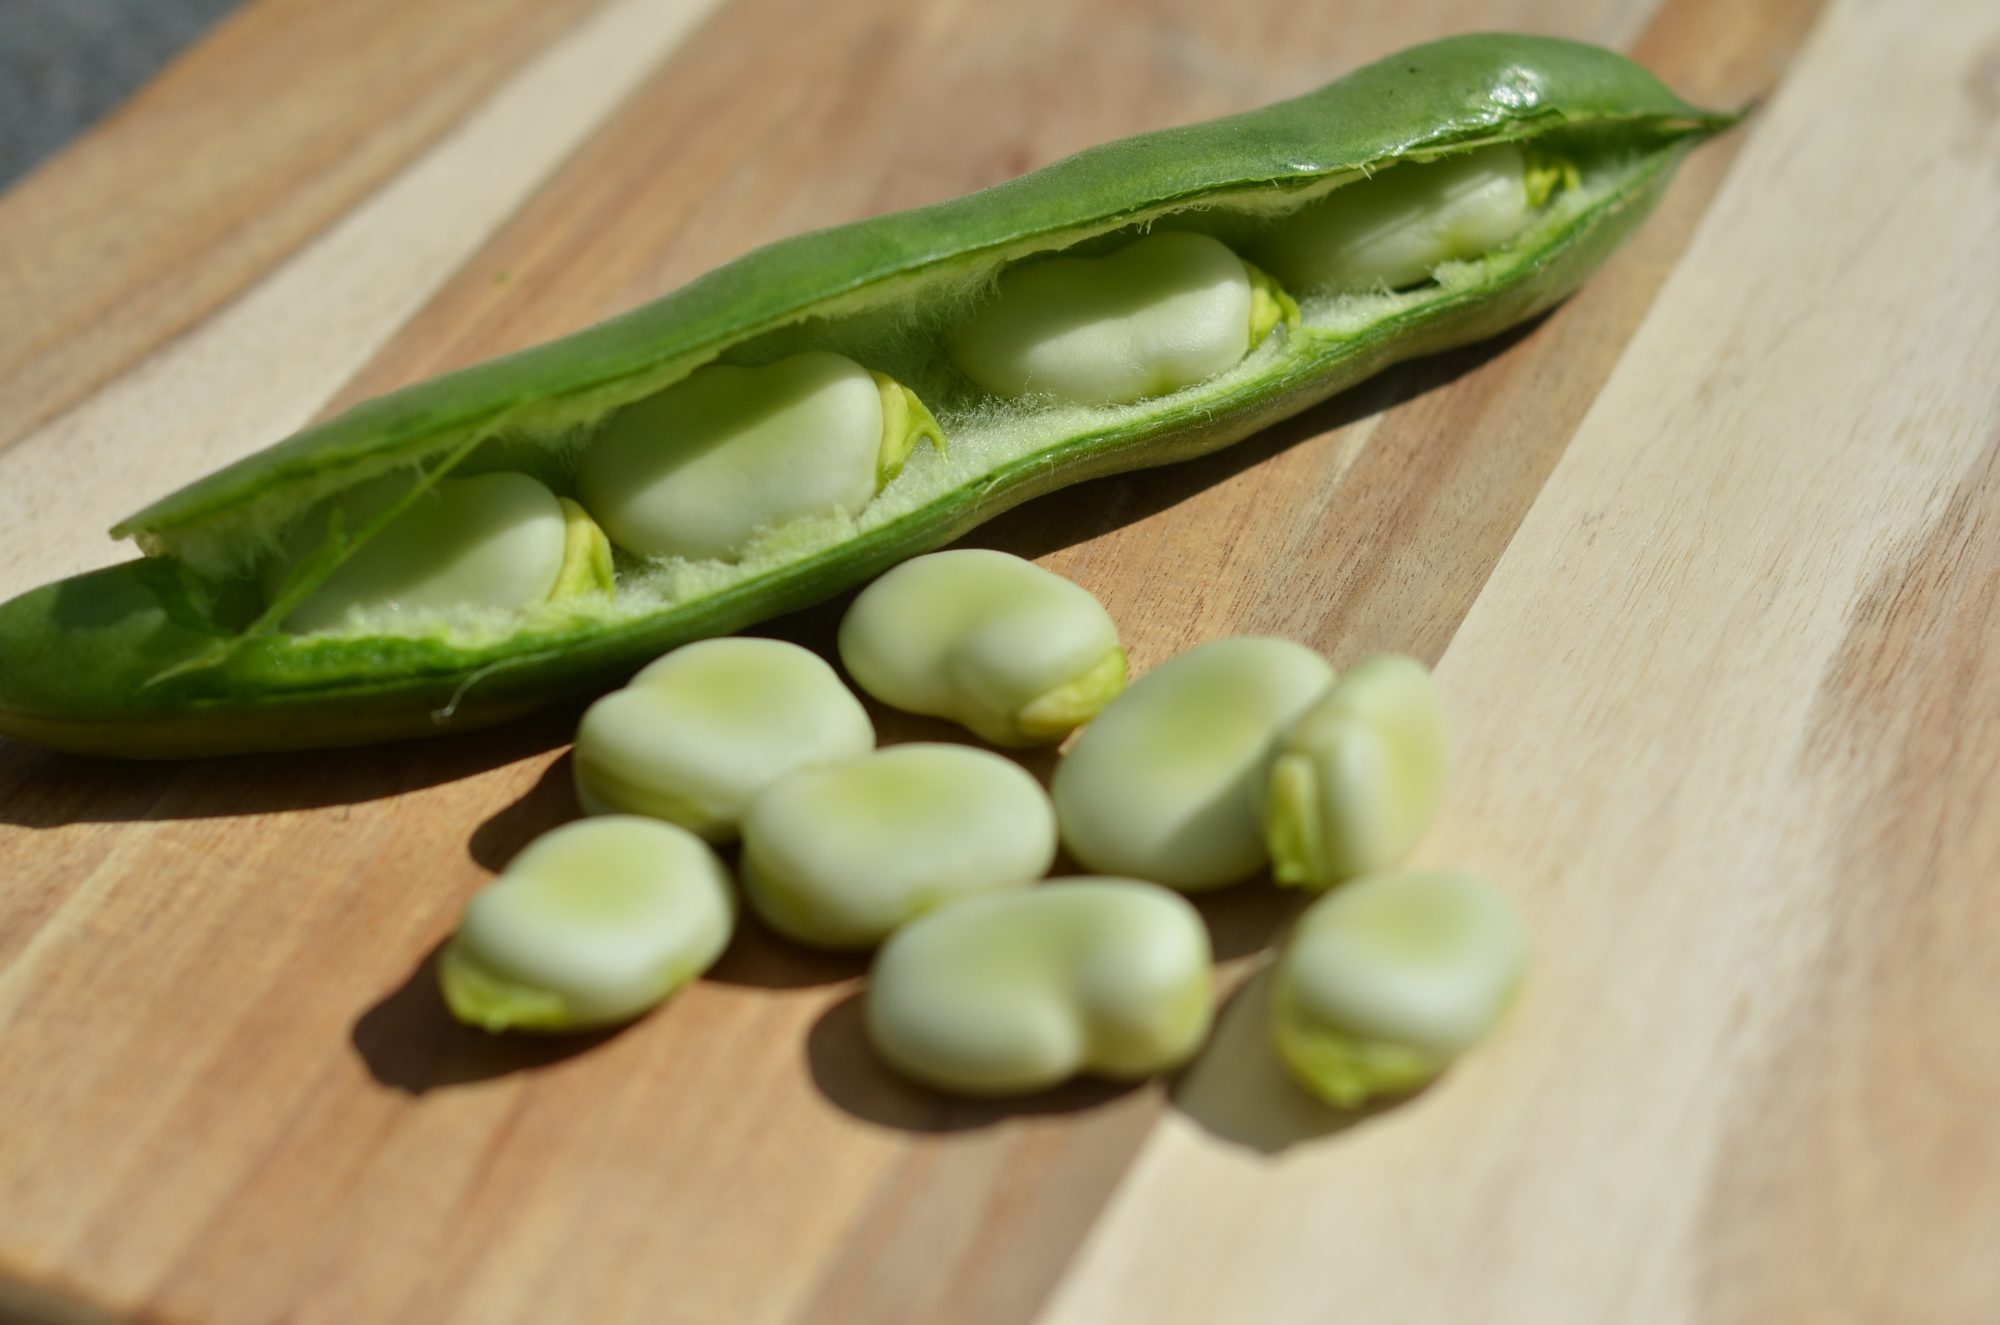 Fava beans with pod Getty 8/27/20